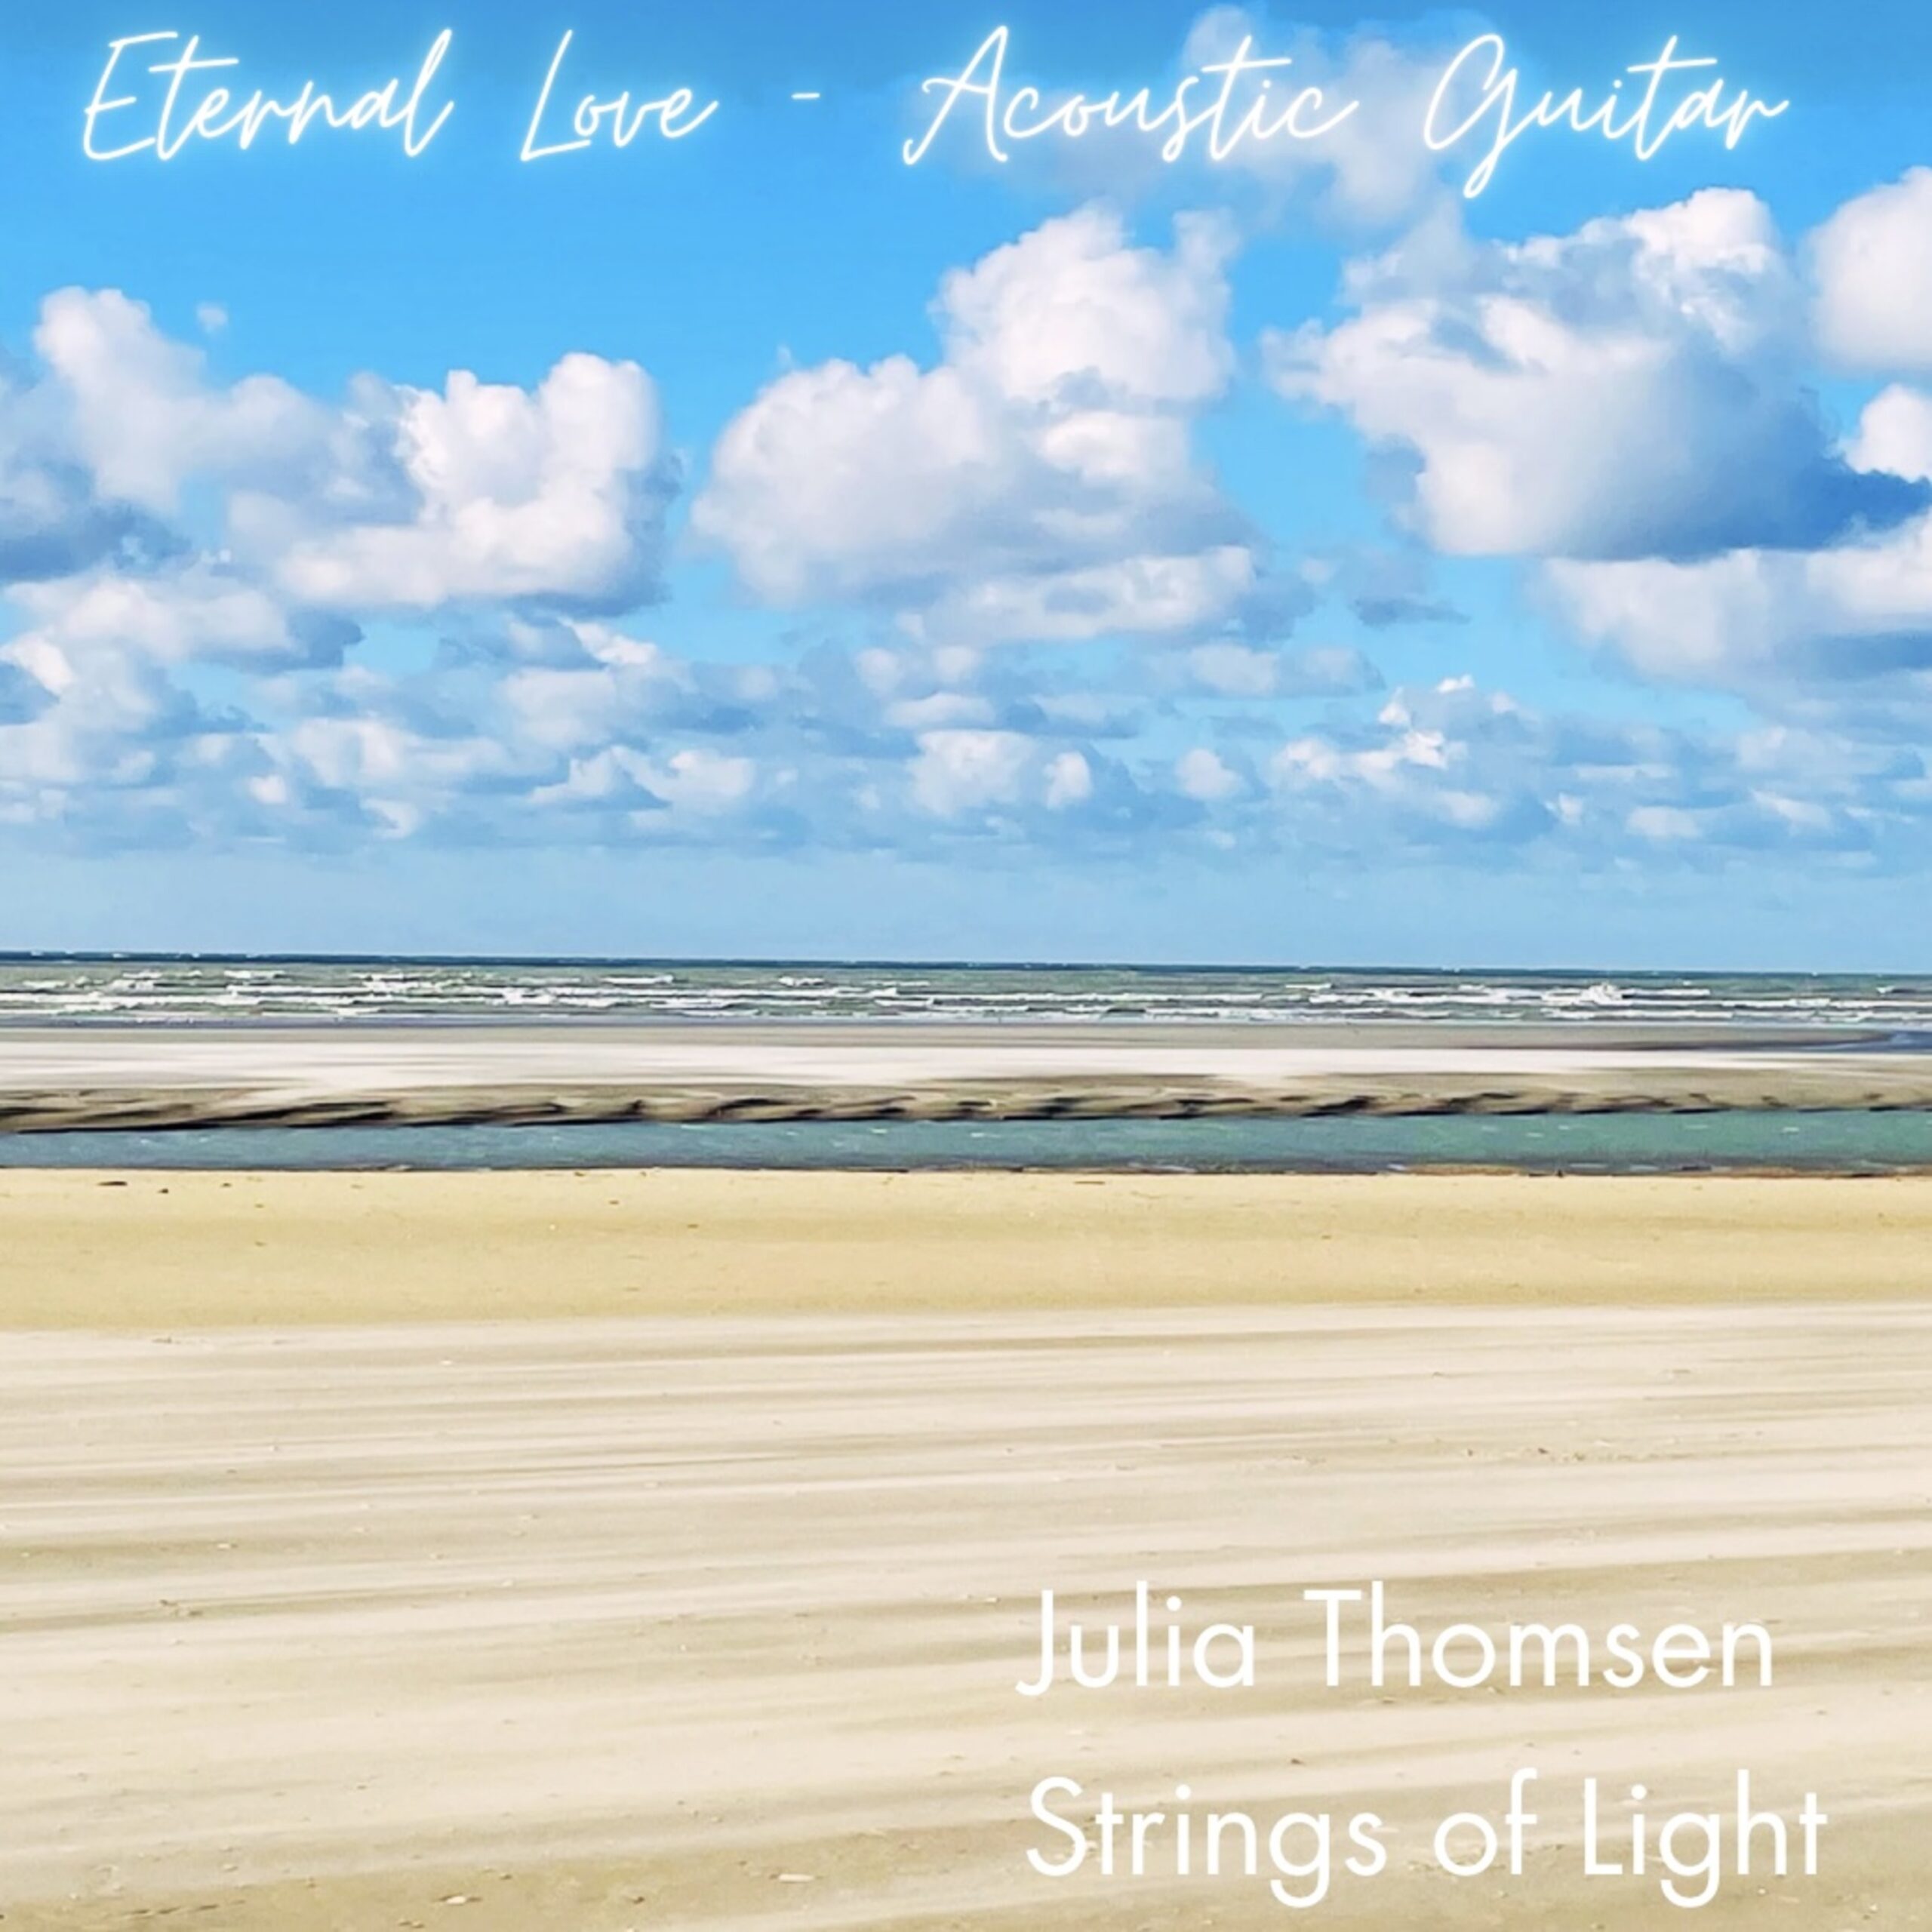 Julia Thomsen and Strings of Light Illuminate with Acoustic Guitar Rendition of 'Eternal Love'